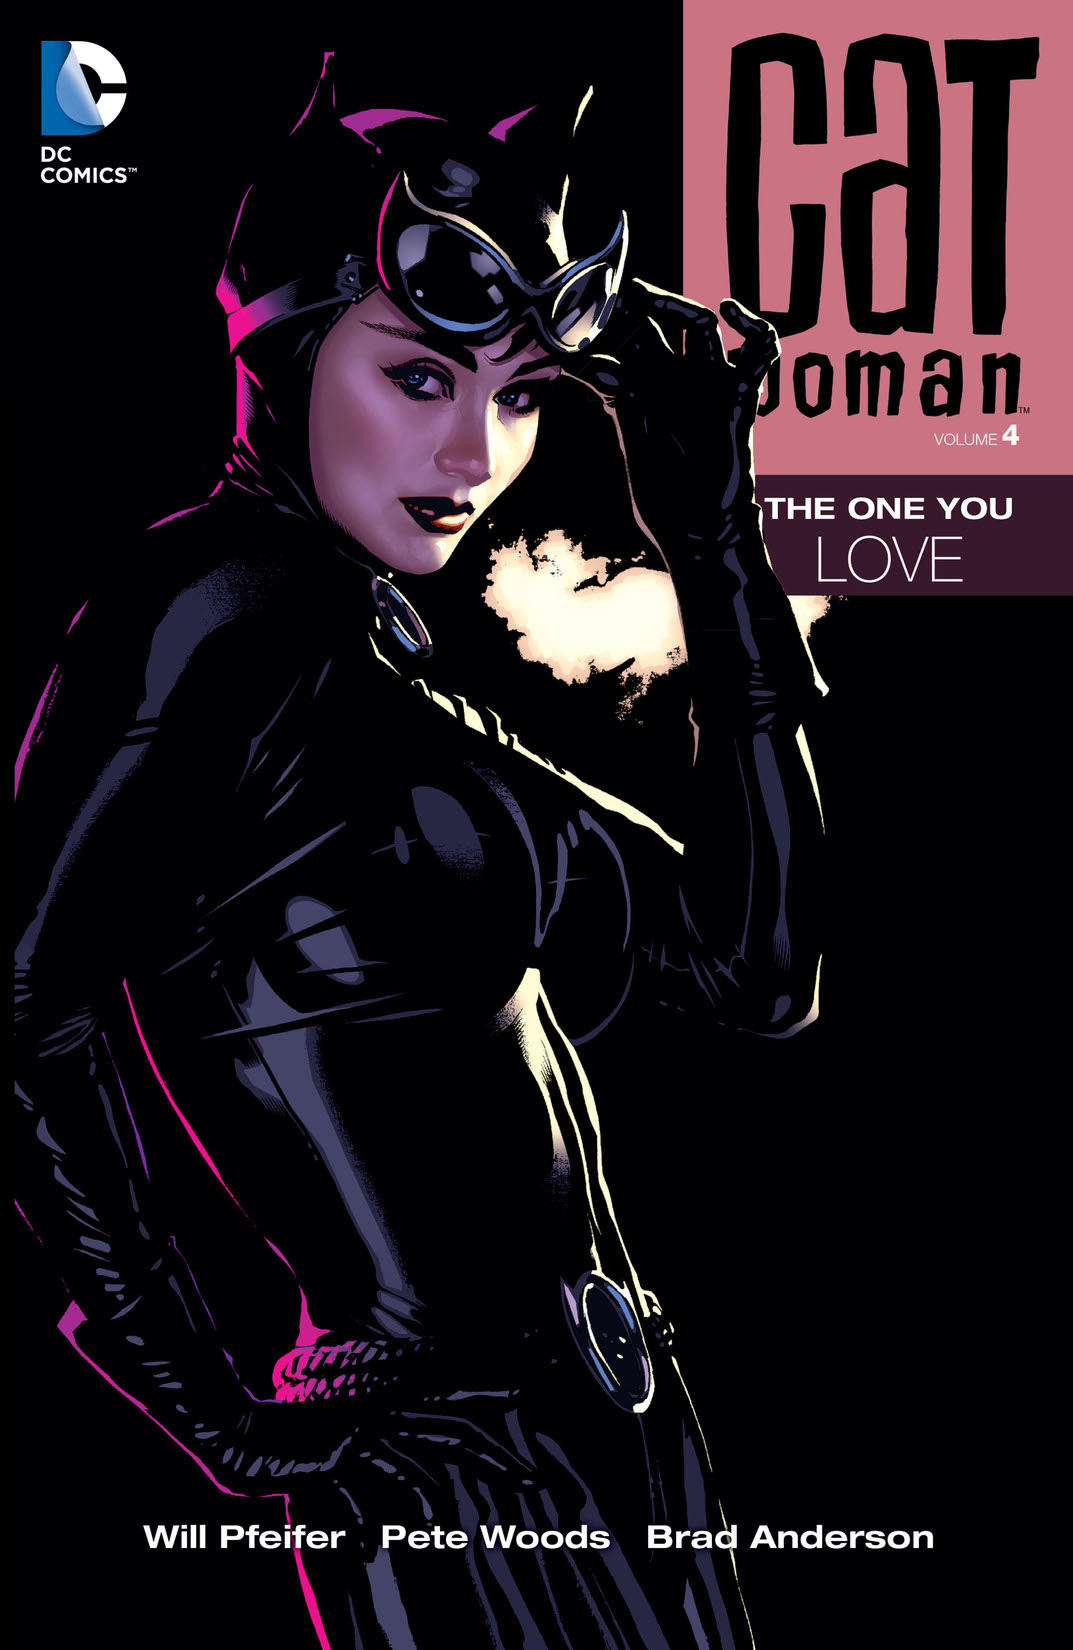 Catwoman Vol. 4: The One You Love preview images